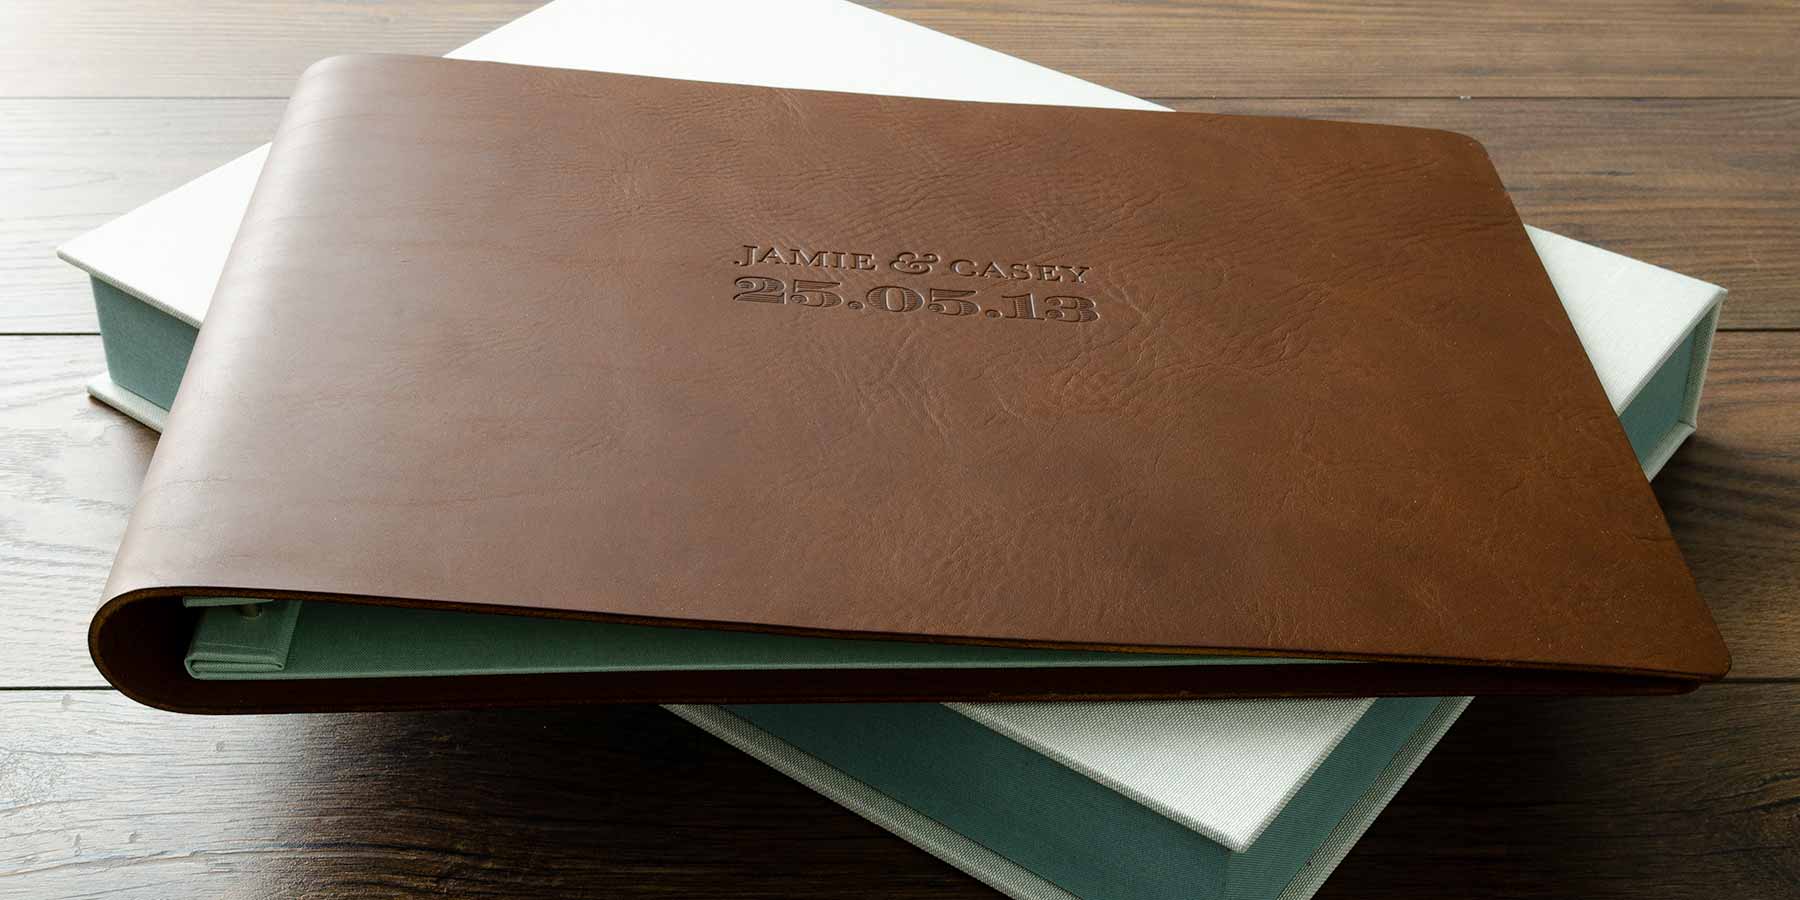 leather is the third anniversary gift this is a custom made leather wedding album to celebrate the date